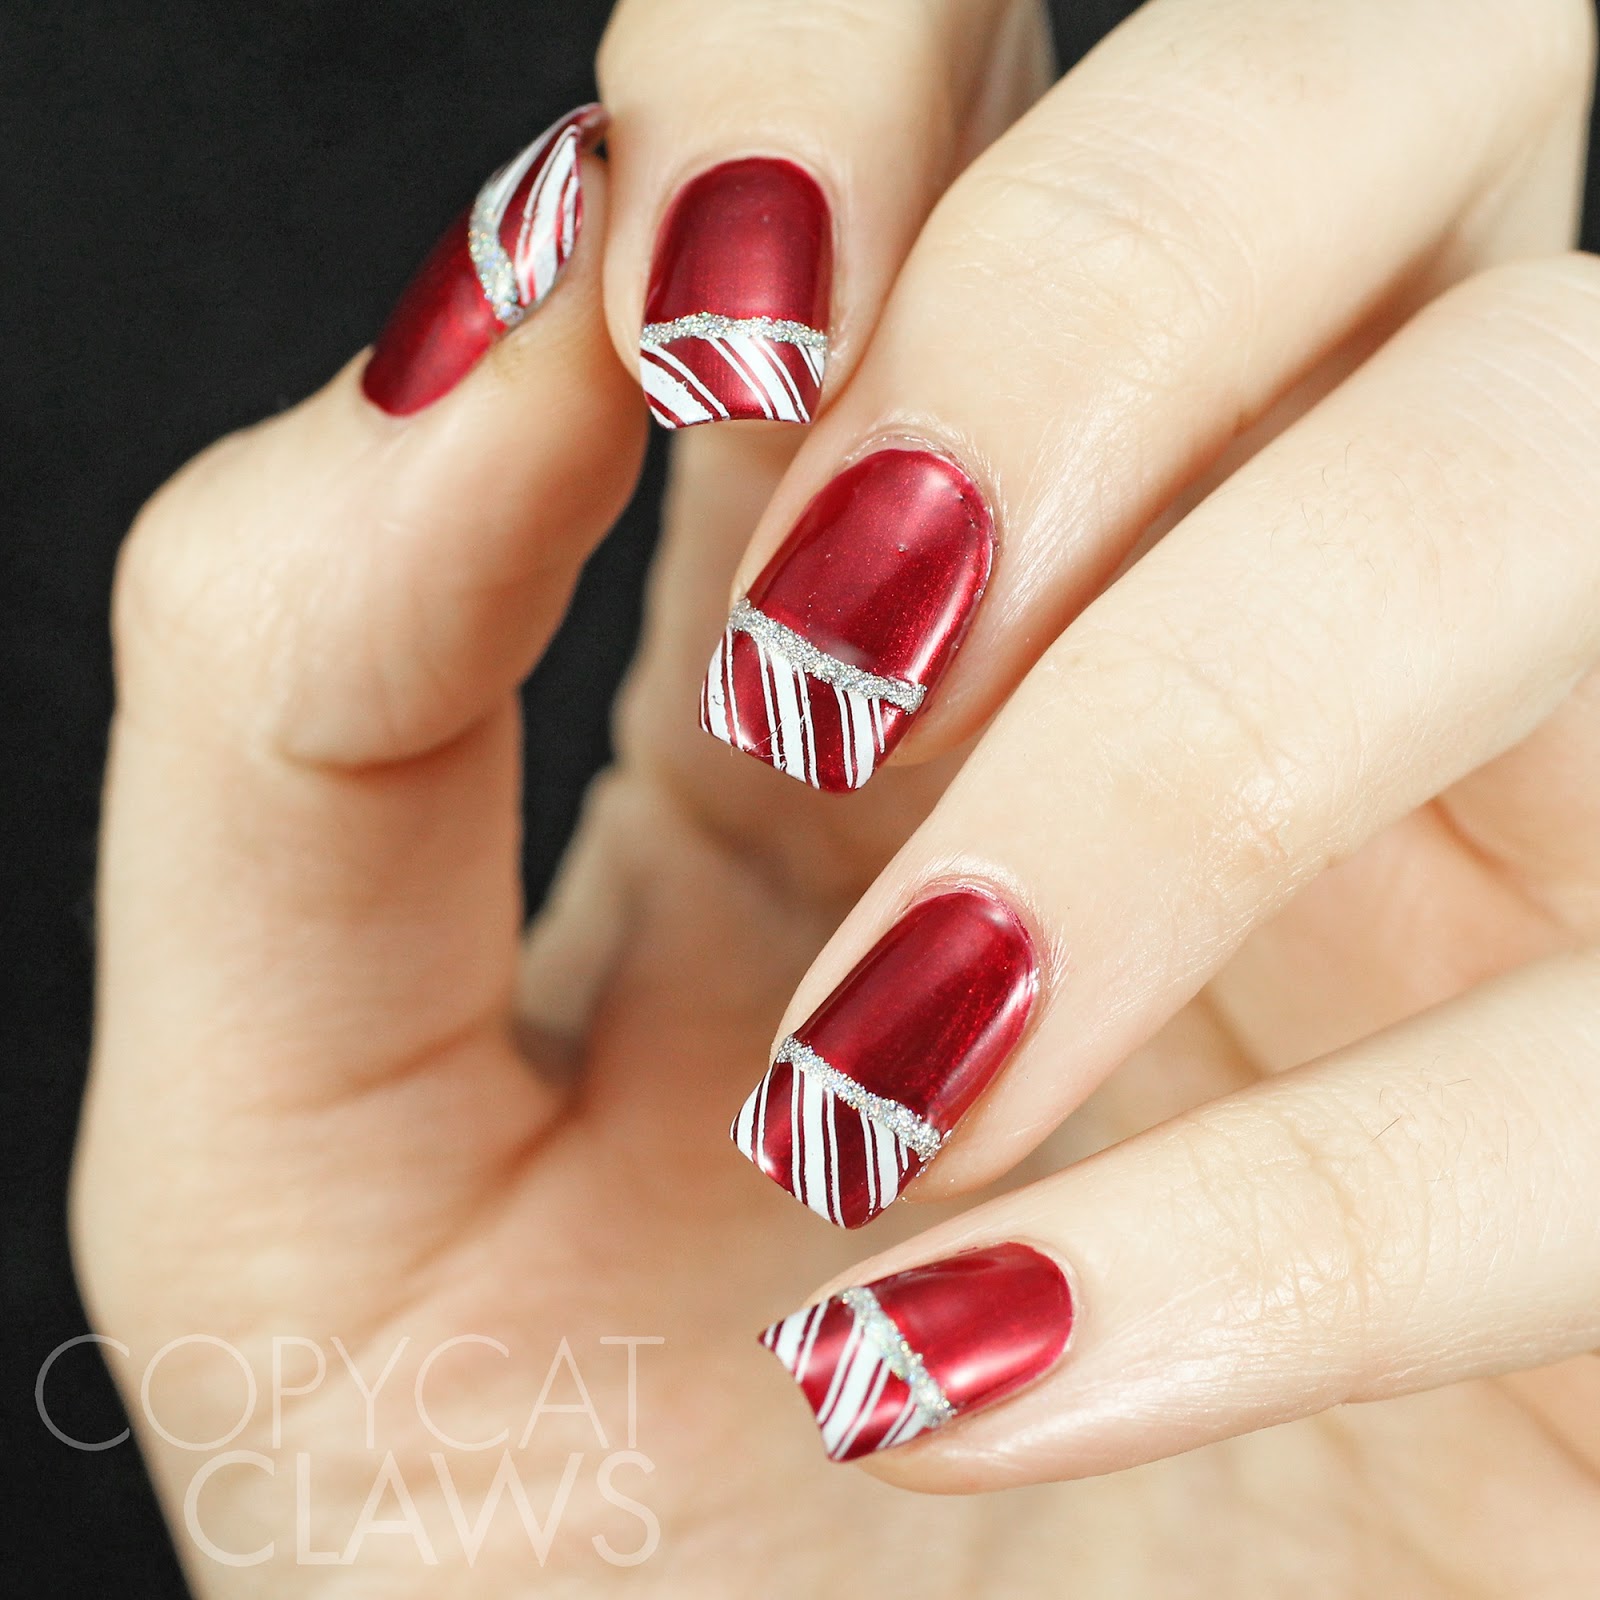 Copycat Claws: Bundle Monster Review including Christmas/NYE Stamping ...